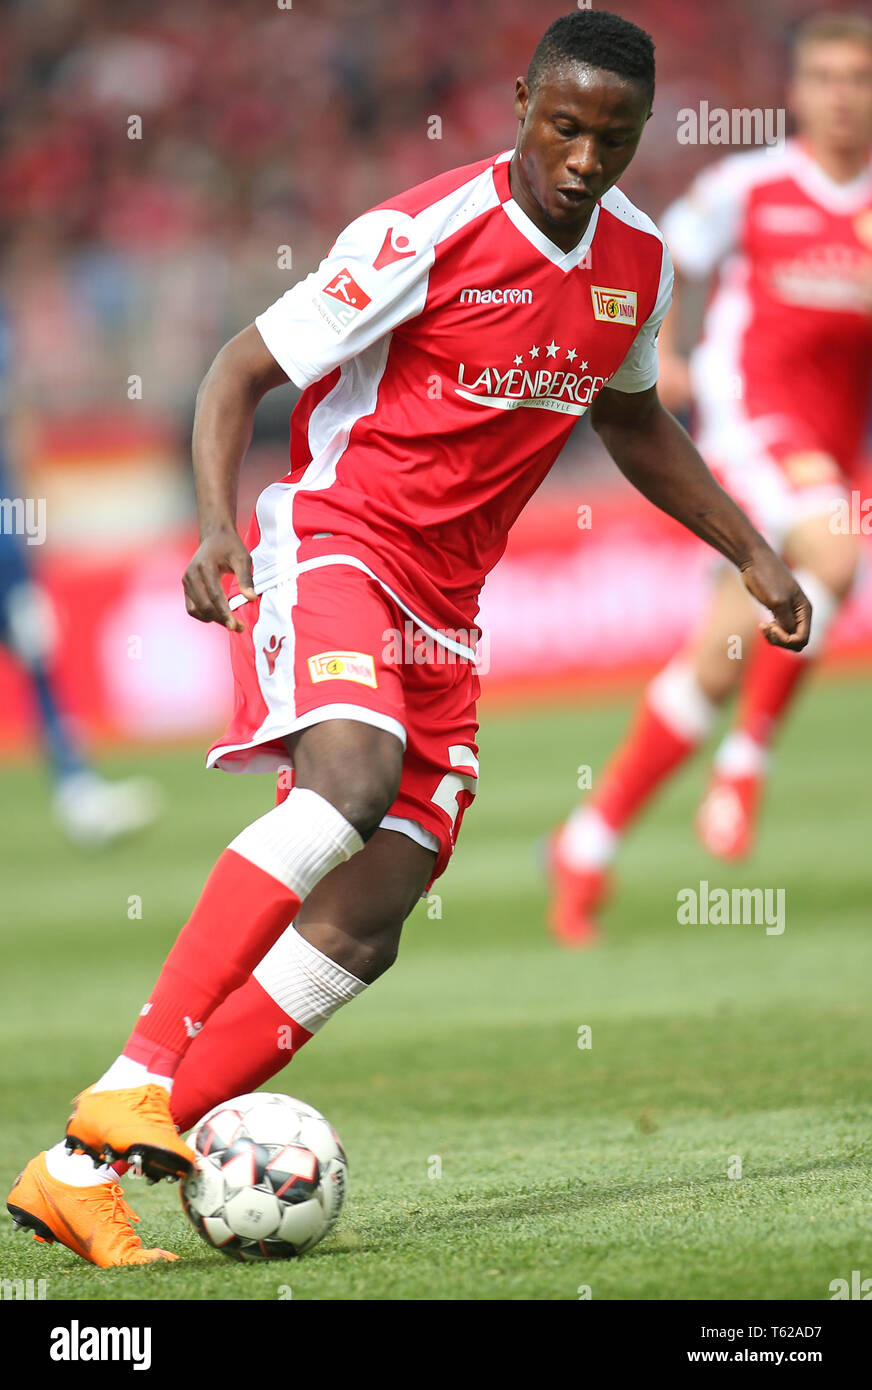 Berlin, Germany. 28th Apr, 2019. Soccer: 2nd Bundesliga, 1st FC Union Berlin - Hamburger SV, 31st matchday. Berlin's Suleiman Abdullahi plays the ball. Credit: Andreas Gora/dpa - IMPORTANT NOTE: In accordance with the requirements of the DFL Deutsche Fußball Liga or the DFB Deutscher Fußball-Bund, it is prohibited to use or have used photographs taken in the stadium and/or the match in the form of sequence images and/or video-like photo sequences./dpa/Alamy Live News Stock Photo